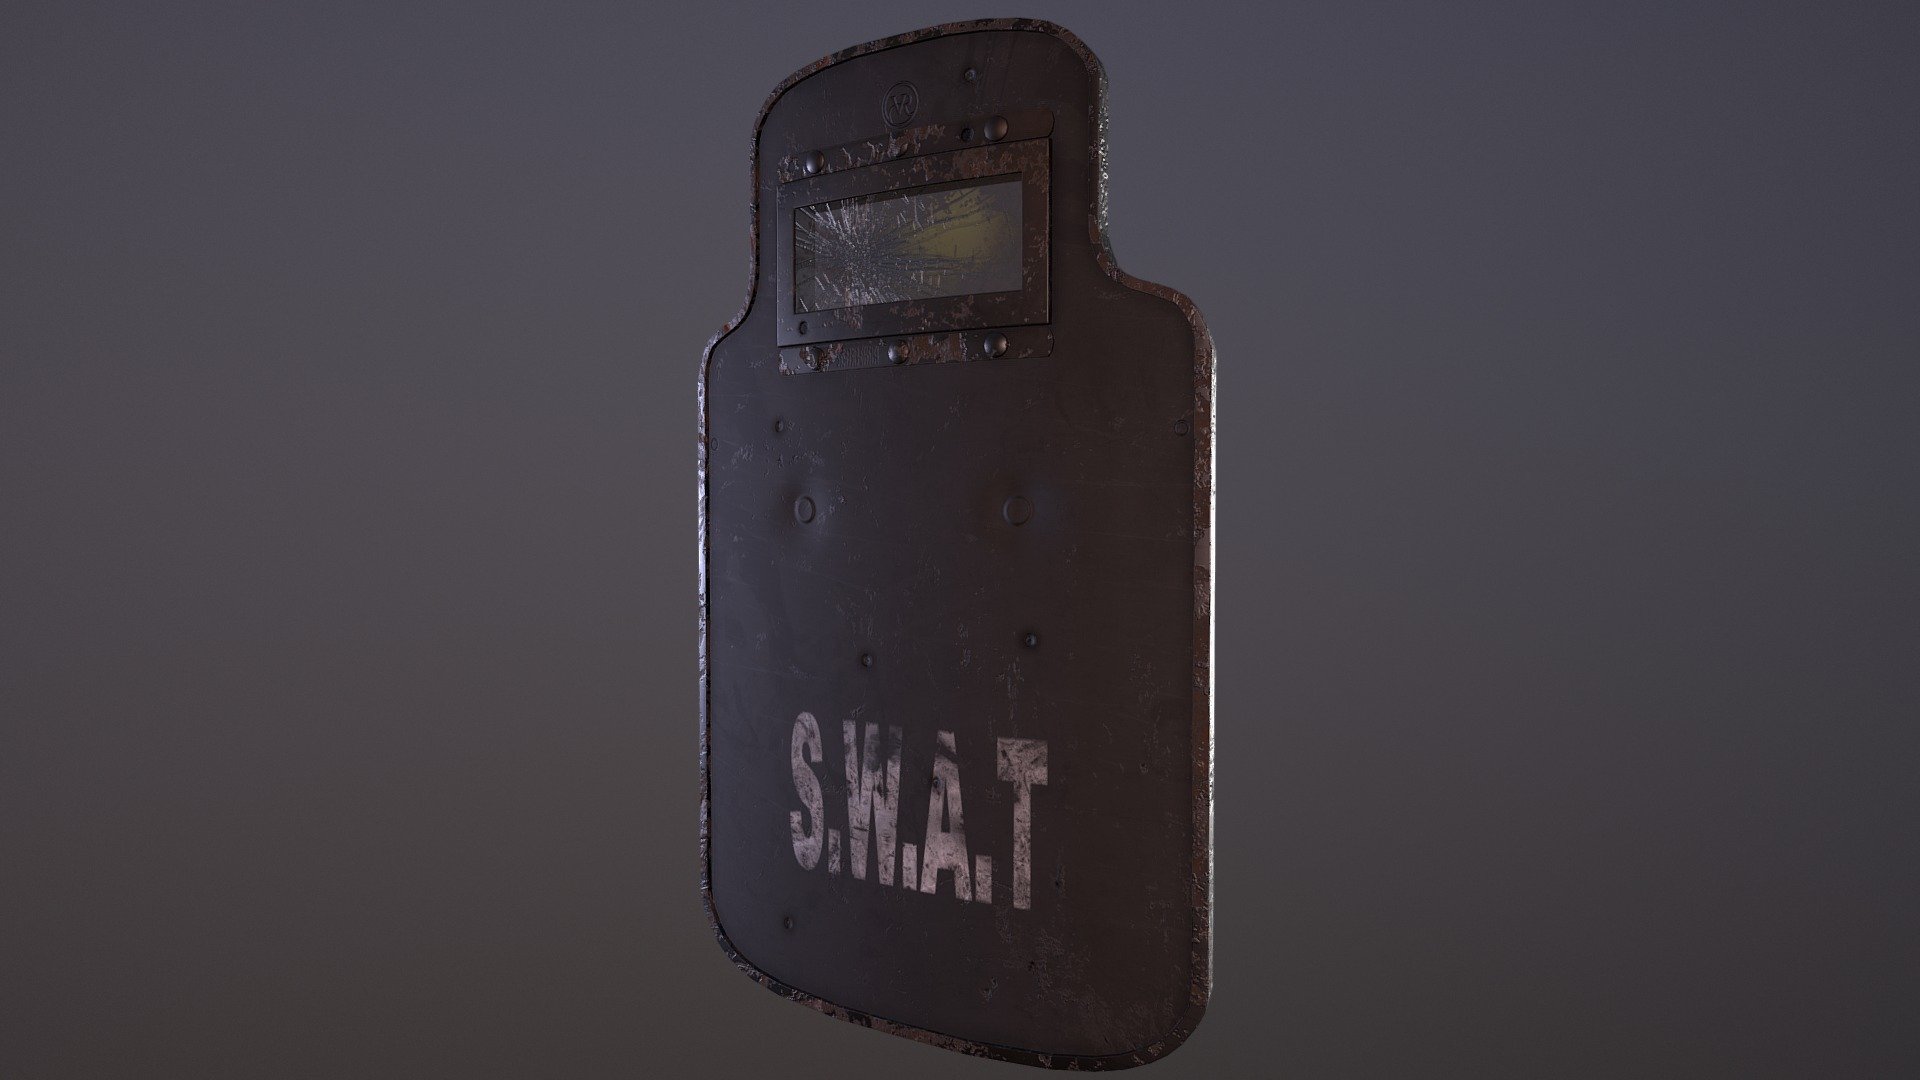 &ldquo;For years this shield has seen combat. Held in the hands of many before it was lost in combat and forgotten as time went by. Rusting away as a former glory of what it once was.